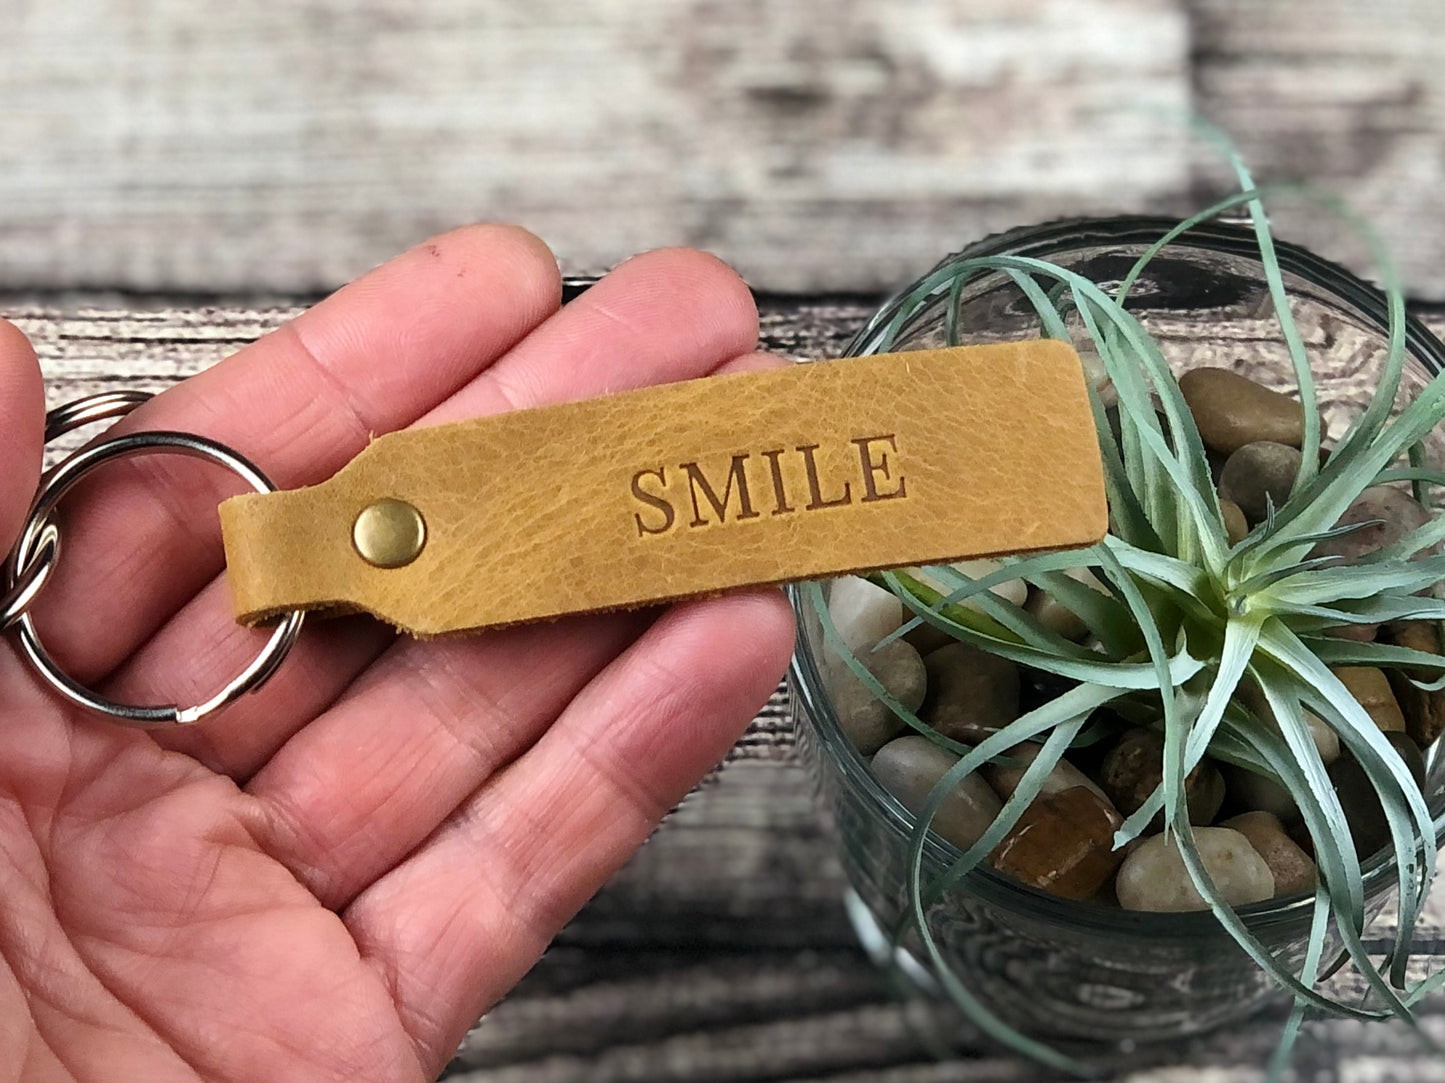 Keychain - Smile - in various leathers